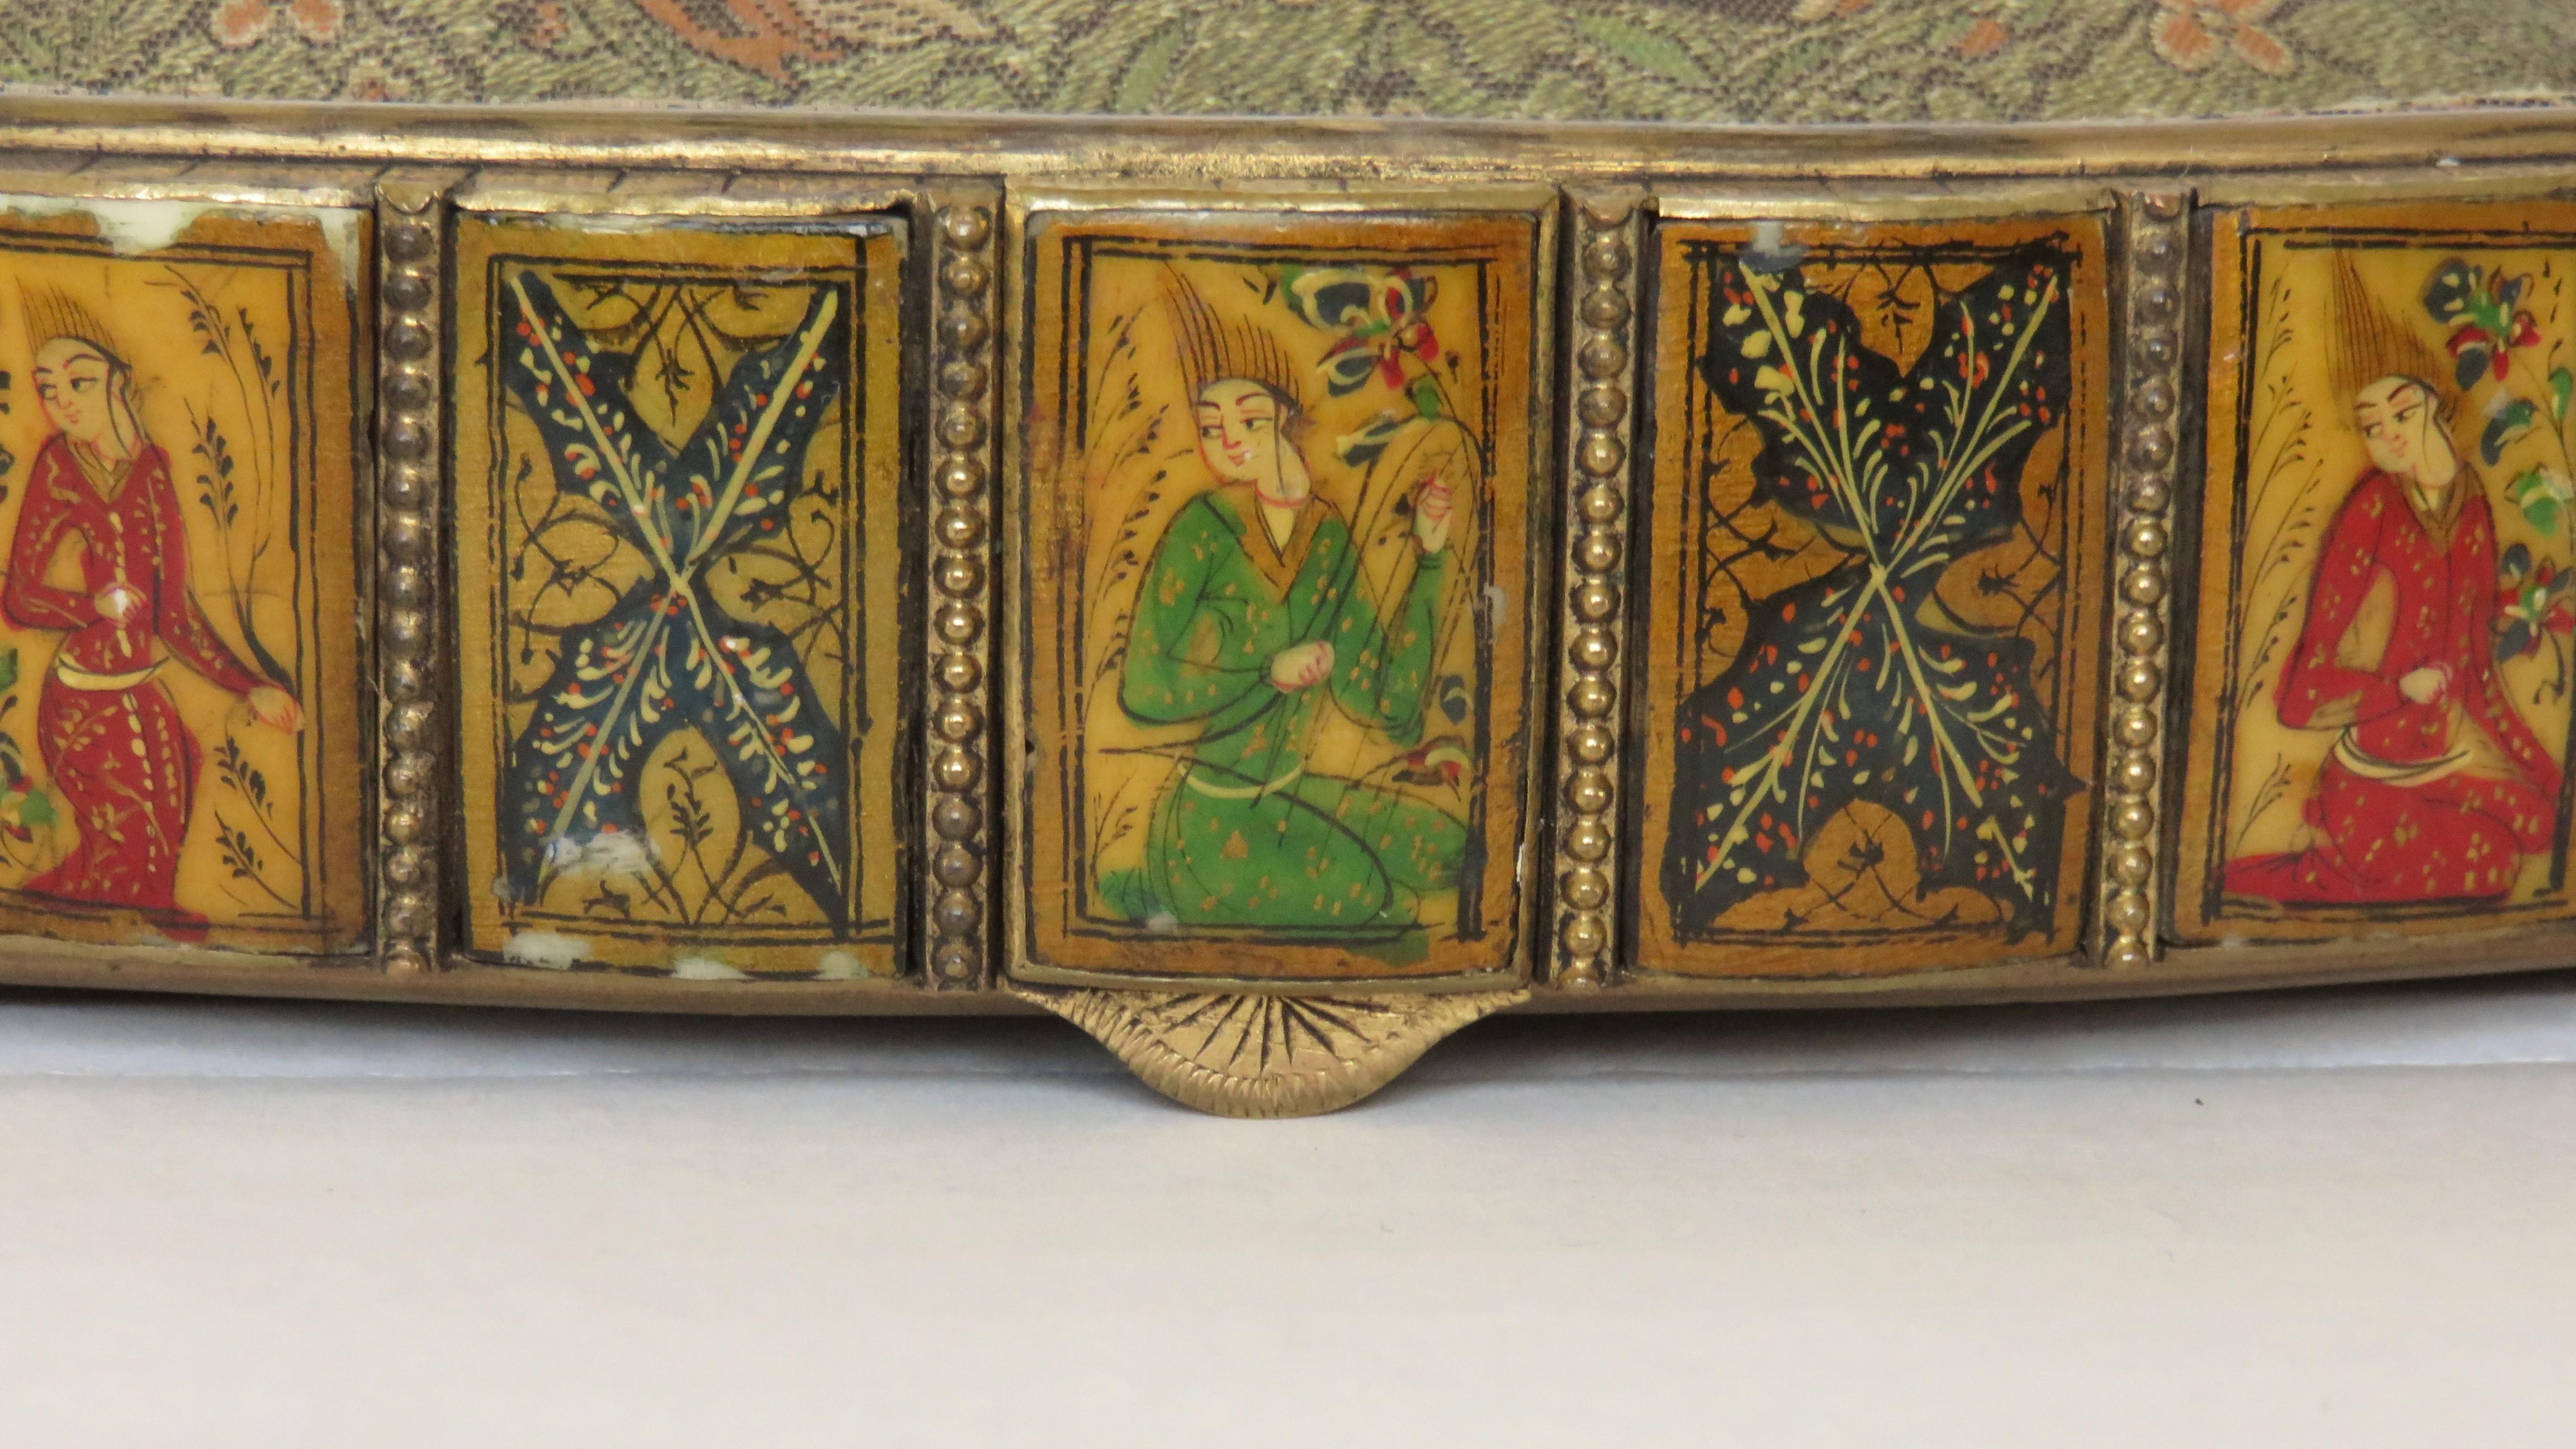 Asian Figure Motif Brocade Clutch with Painted Figures Tile Top 1930s For Sale 3